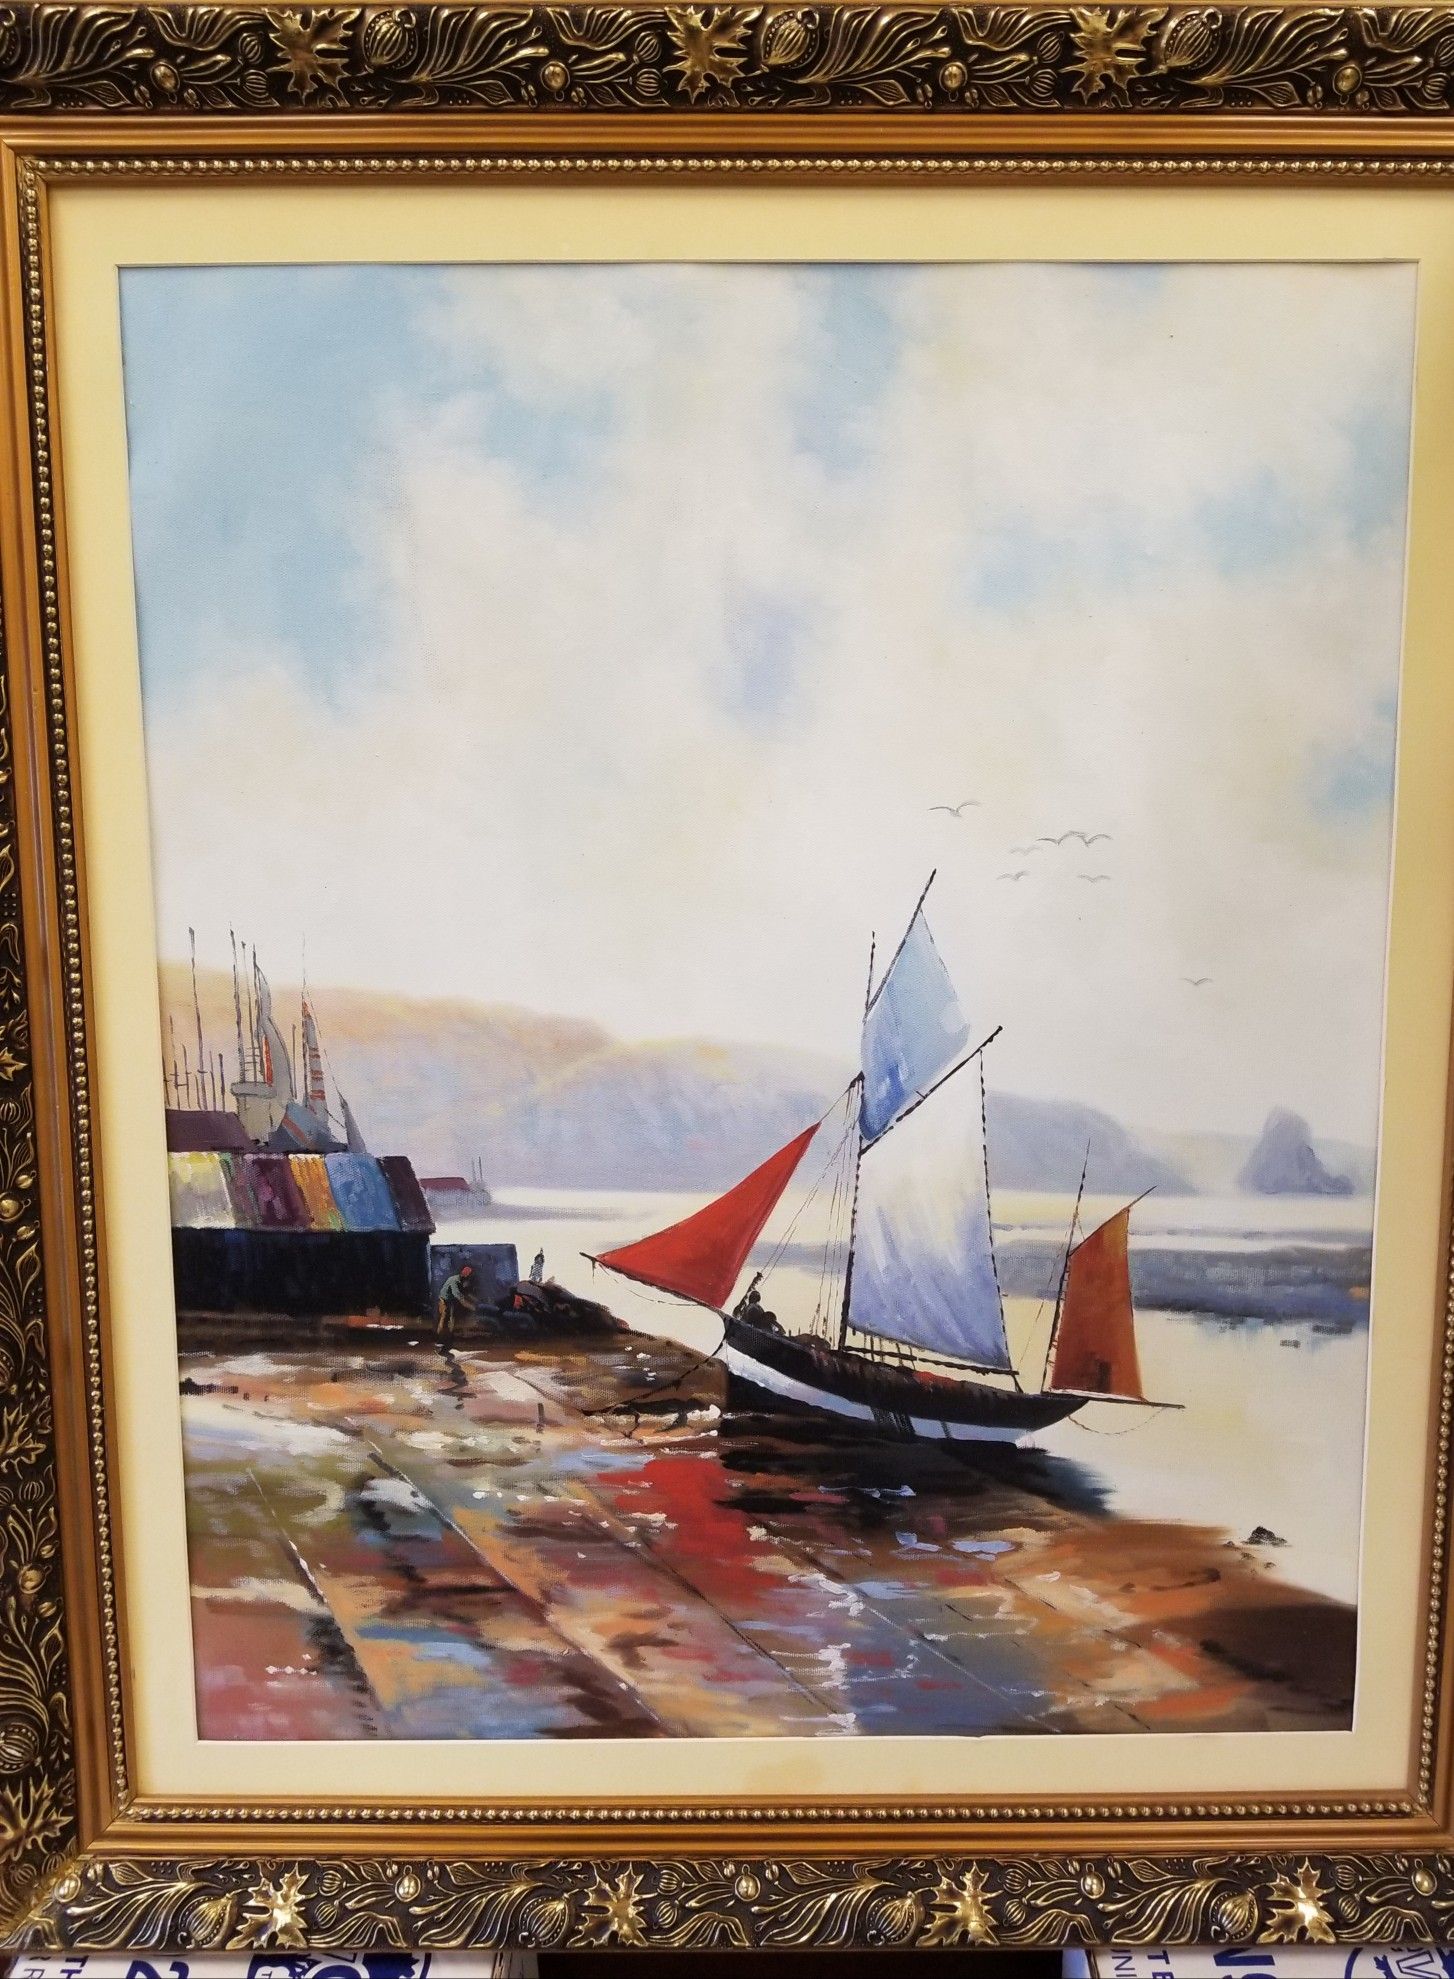 Mother's Day gift, mom Original Abstract Seascape, Seashore, harbor, port, red ships, Sailboat Sailing in Harbor, Pier Oil Painting